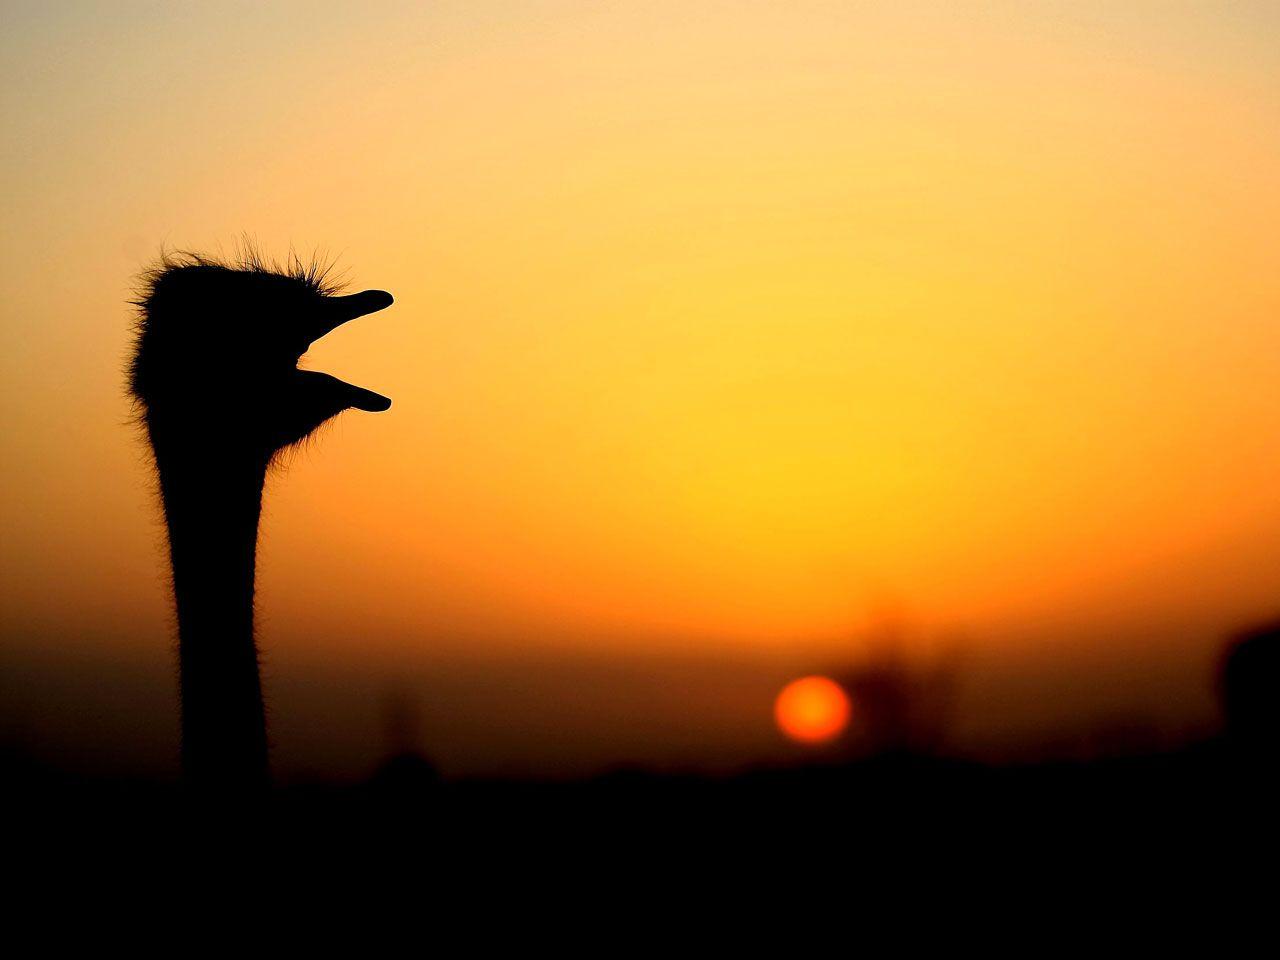 Portrait Of A Ostrich Stock Photo  Download Image Now  Ostrich Cut Out  Bird  iStock